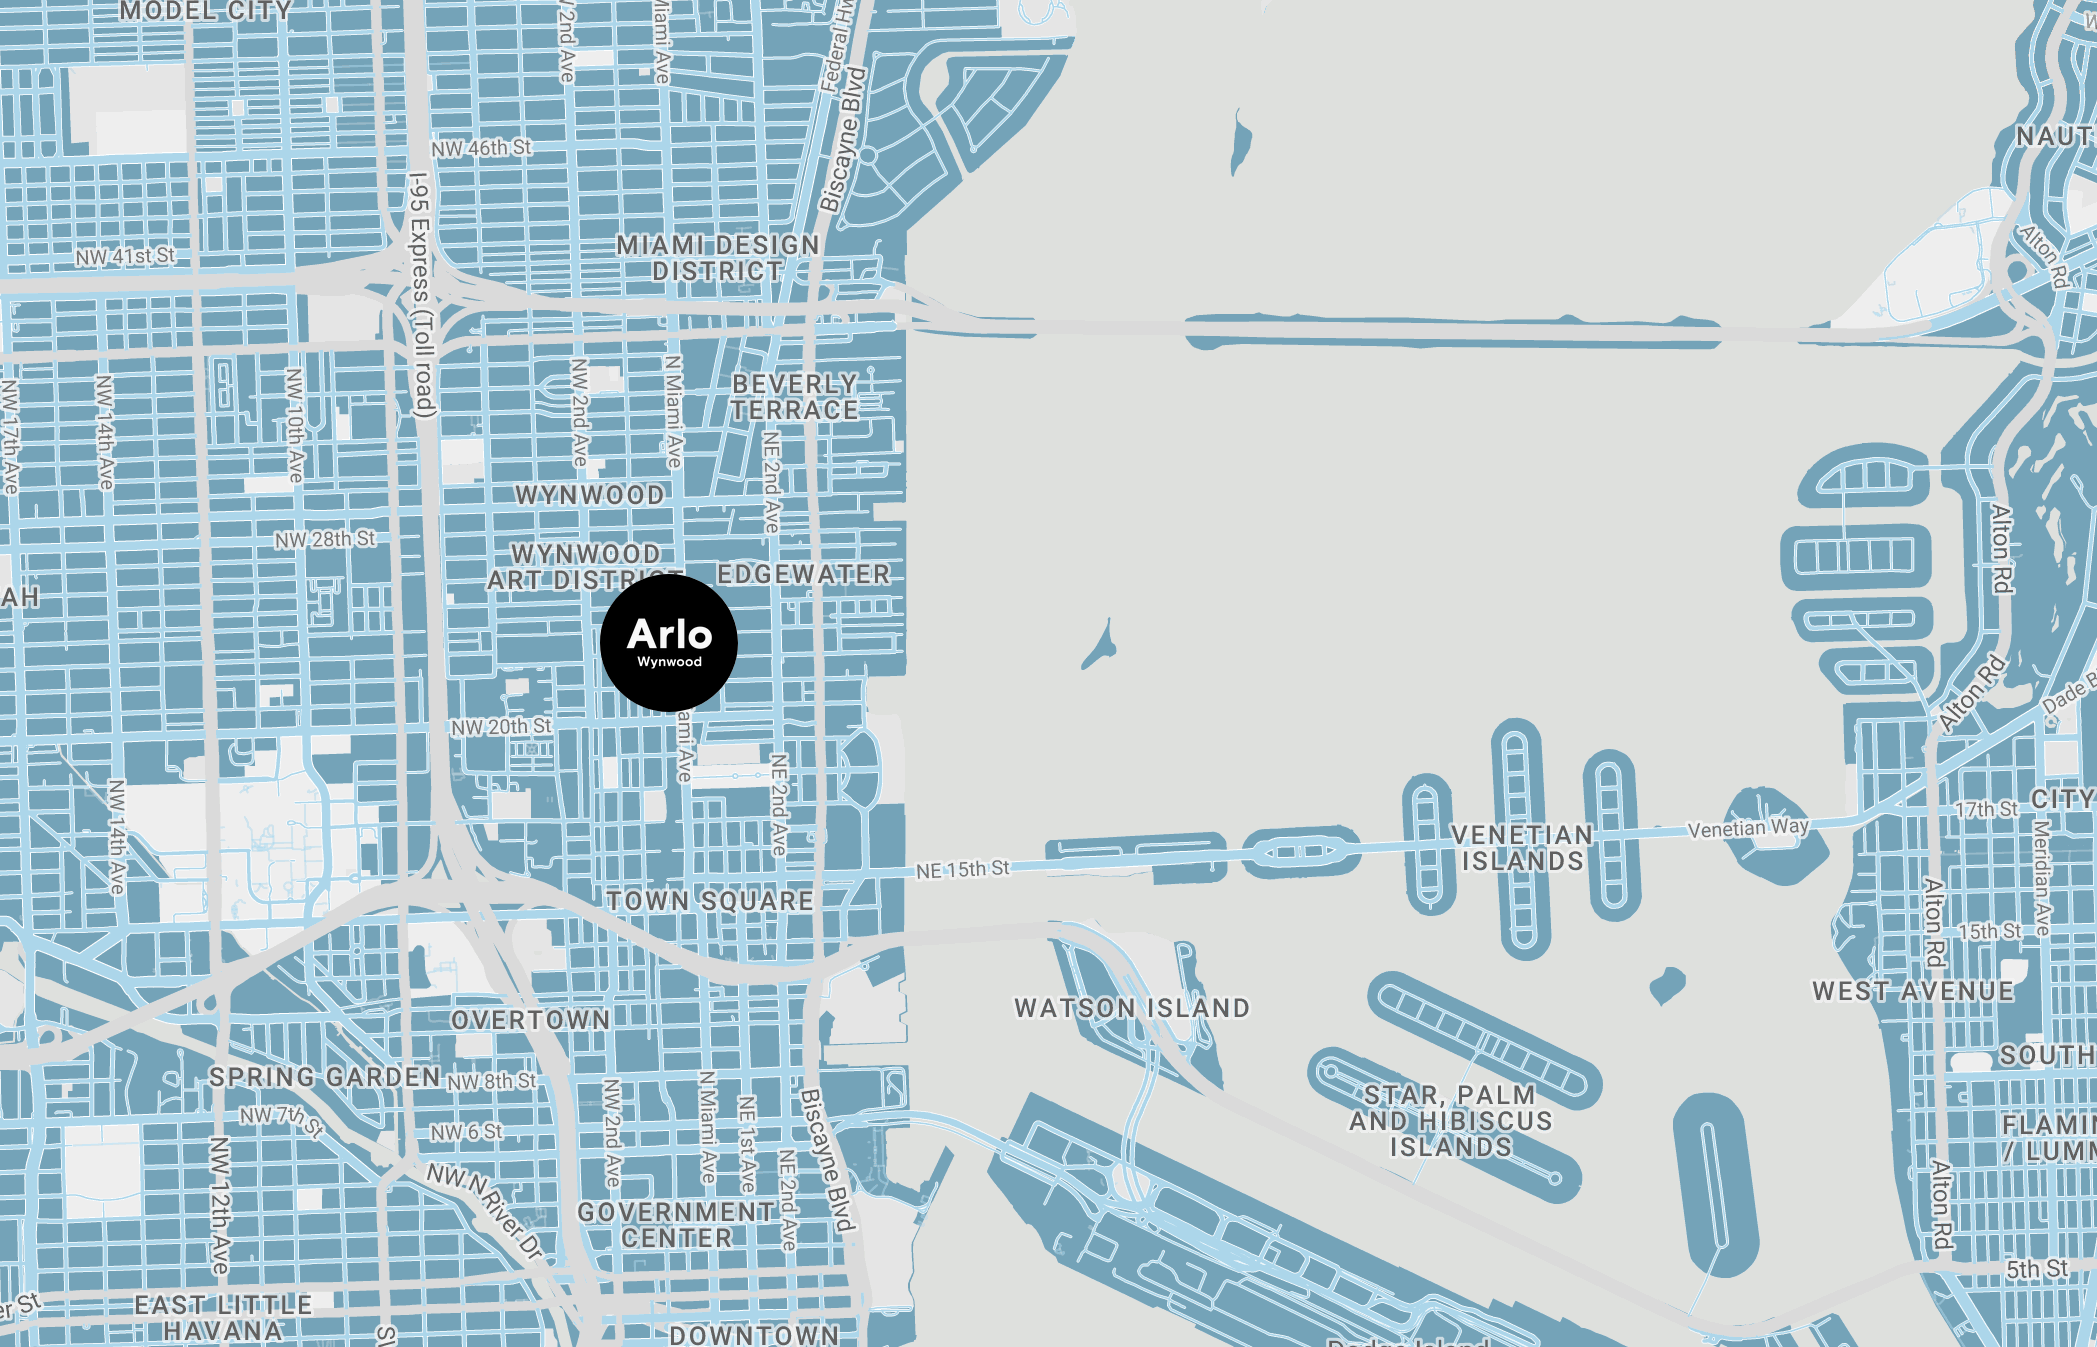 Map view of Miami with location of Arlo Wynwood at 2217 NW Miami Court